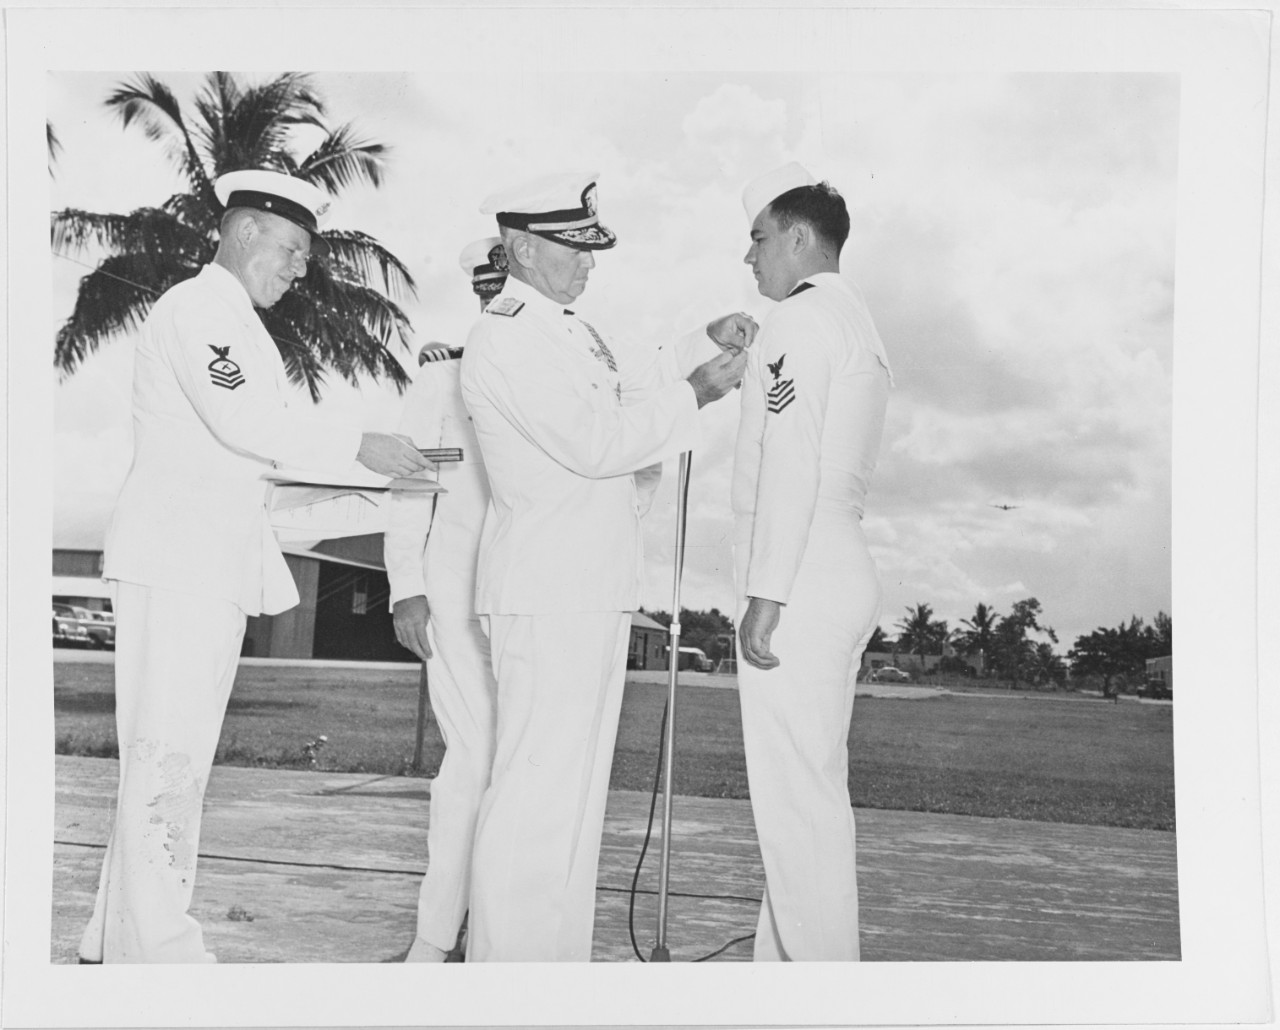 Commo. H.H.J. Benson decorates as sailor late in World War II.